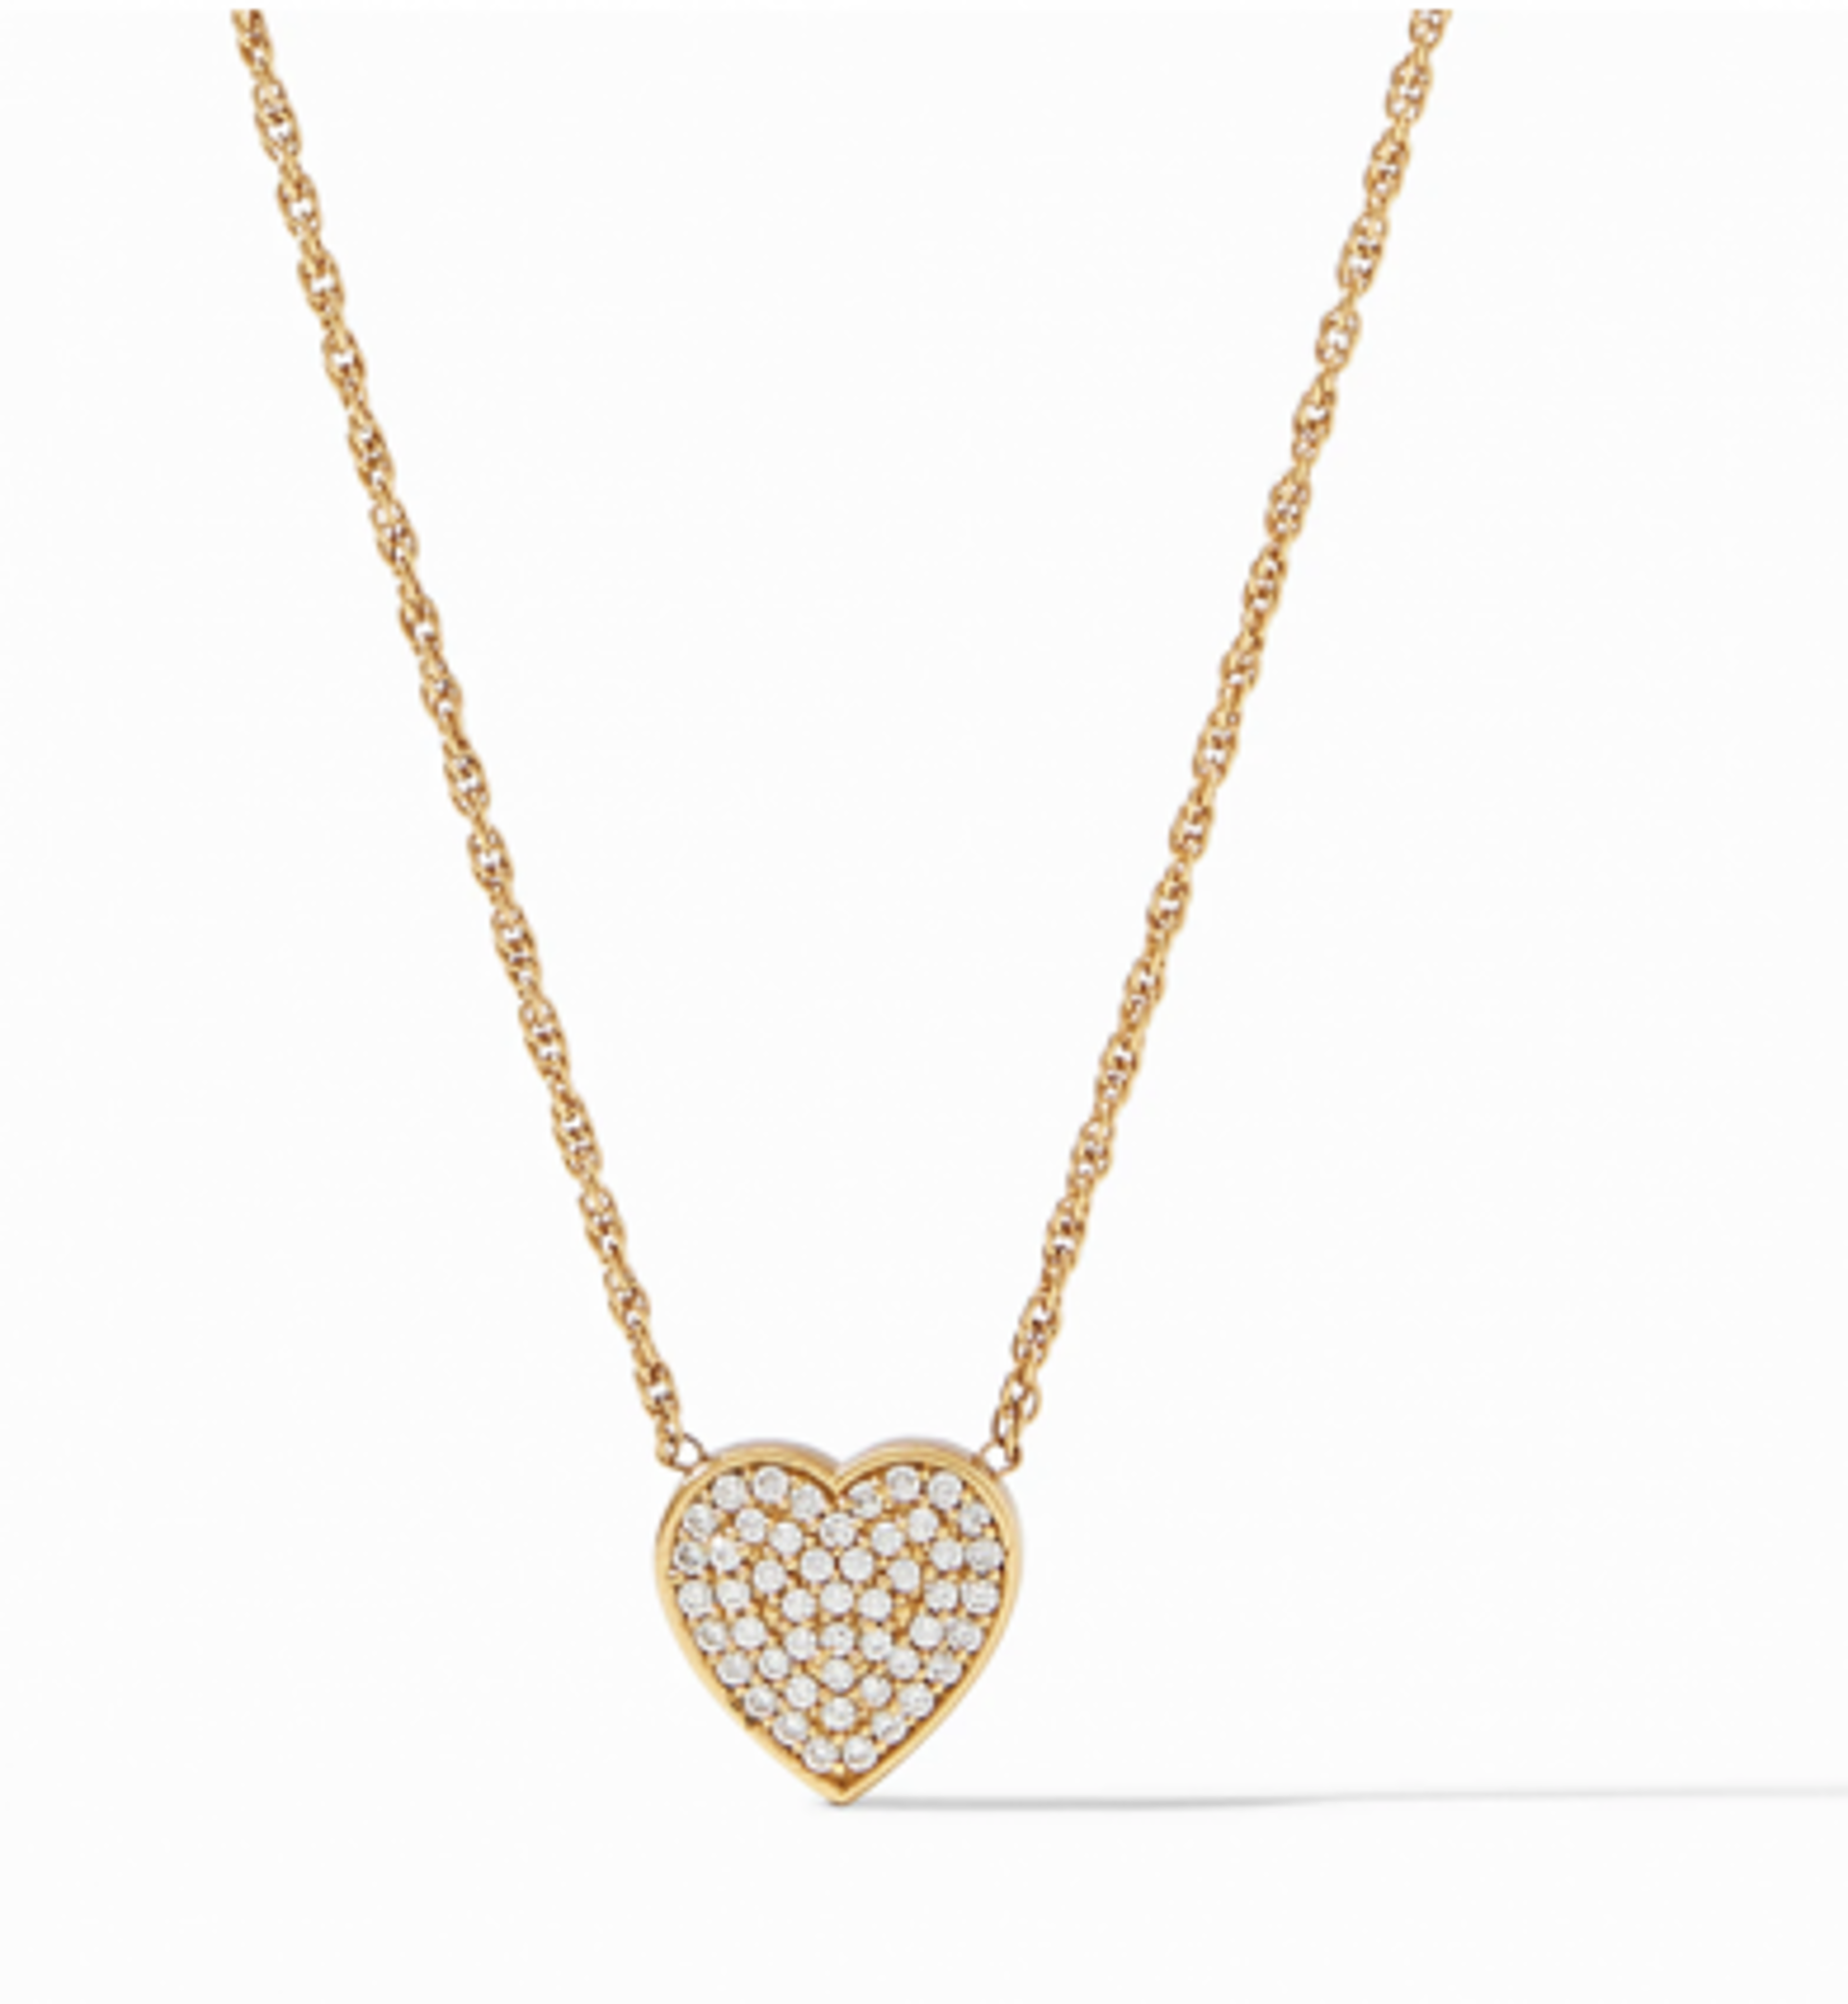 Heart Pave Delicate Necklace by Julie Vos